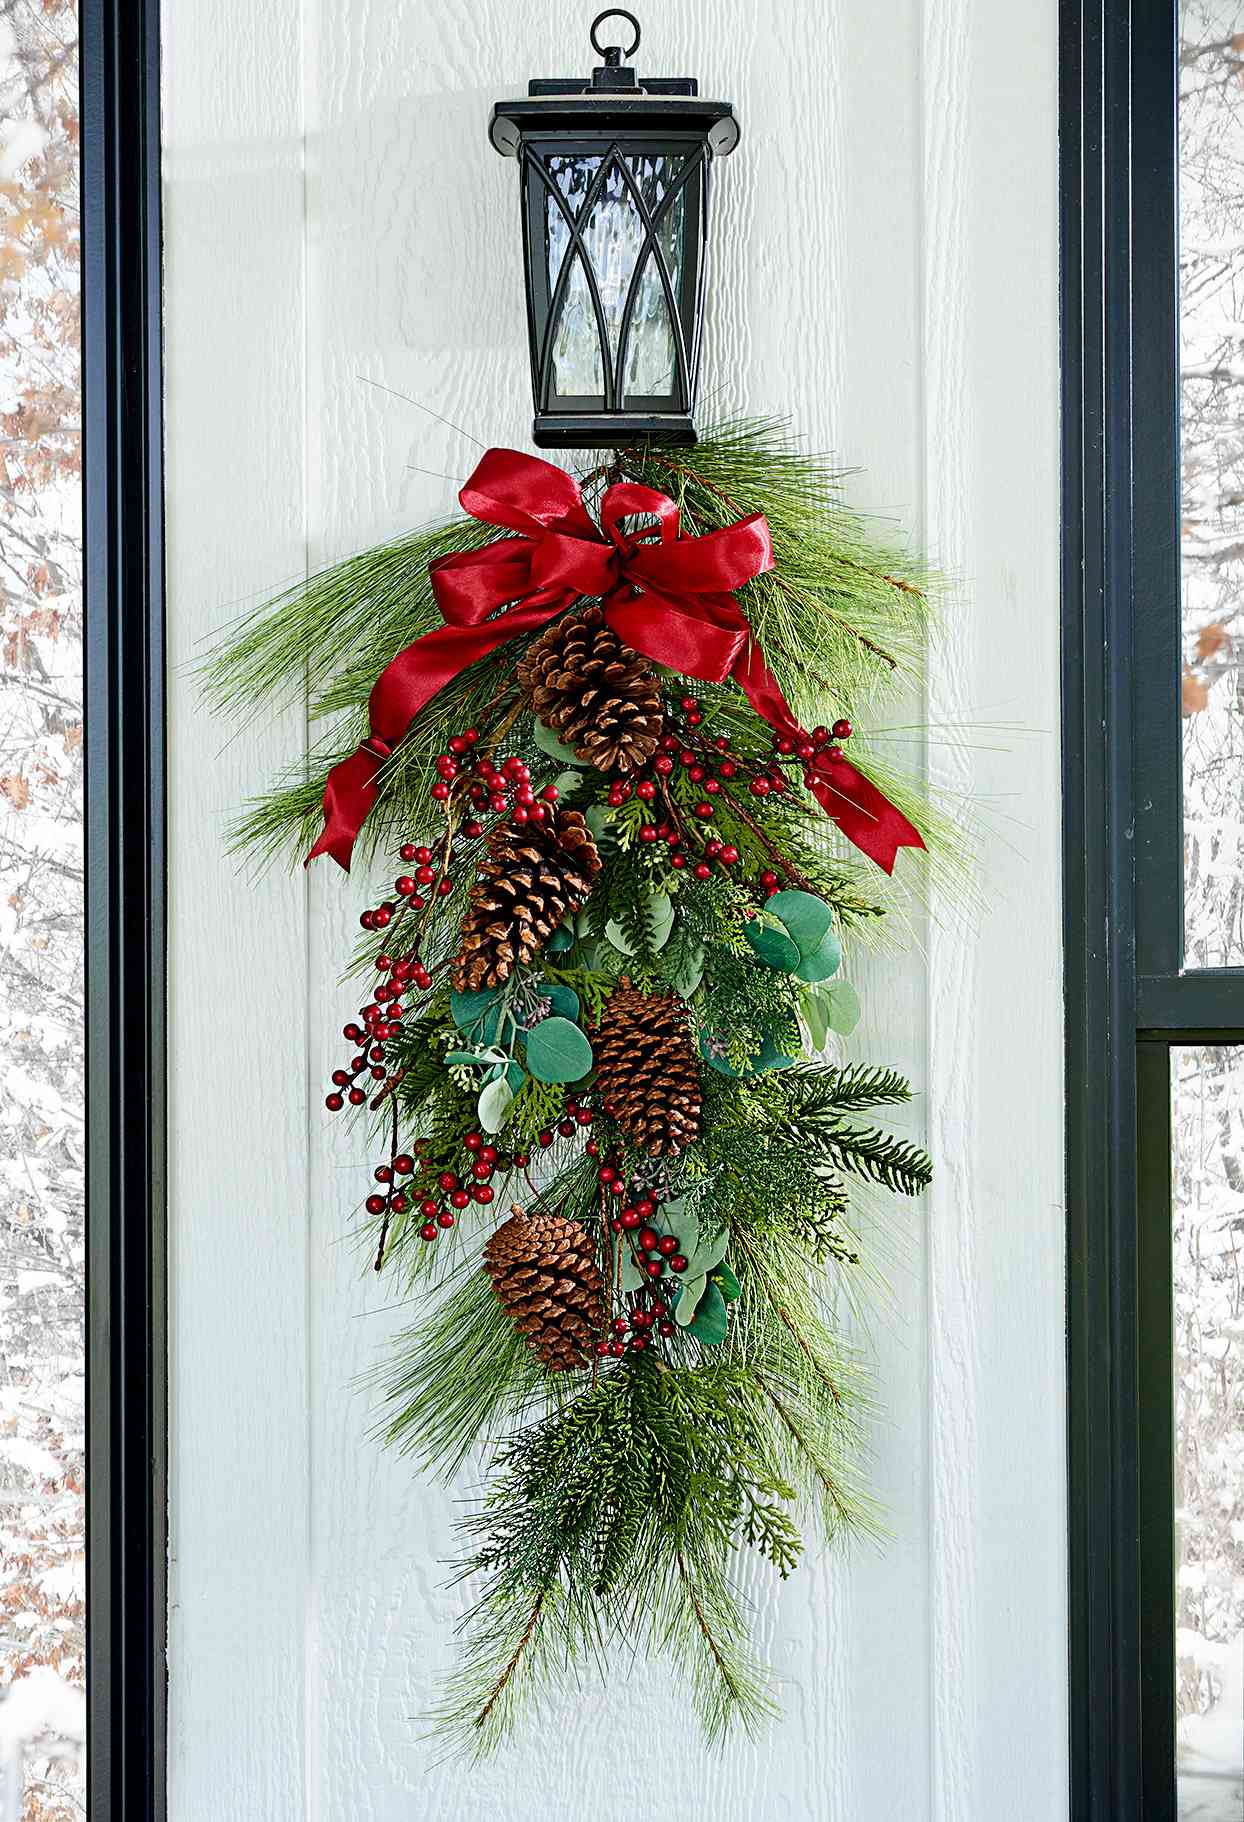 Door wreath made of evergreen, holly, and pinecones